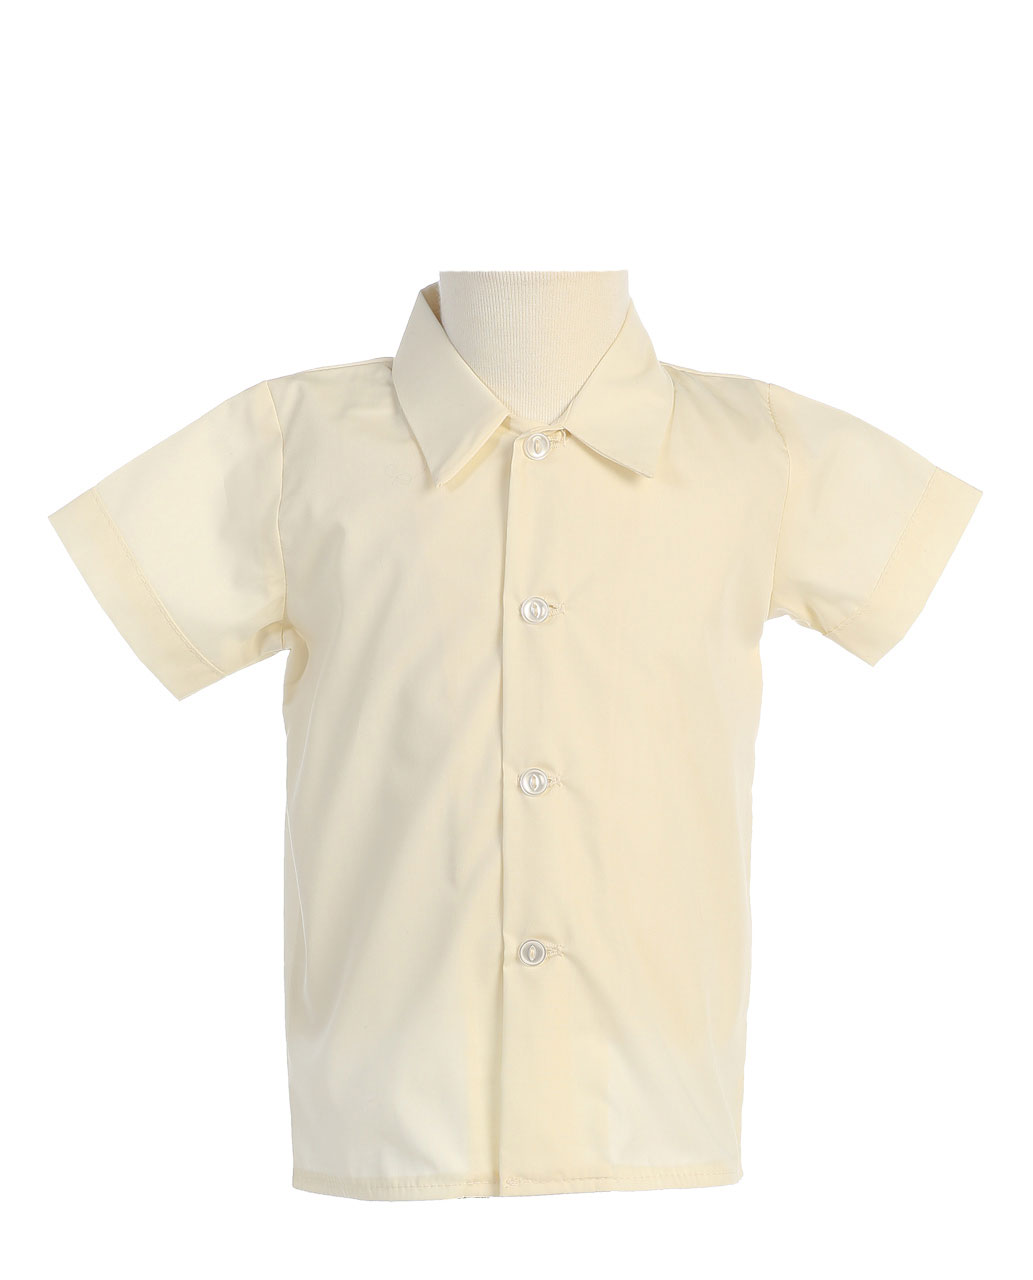 Boys Short Sleeved Simple Dress Shirt - Available in Ivory 5